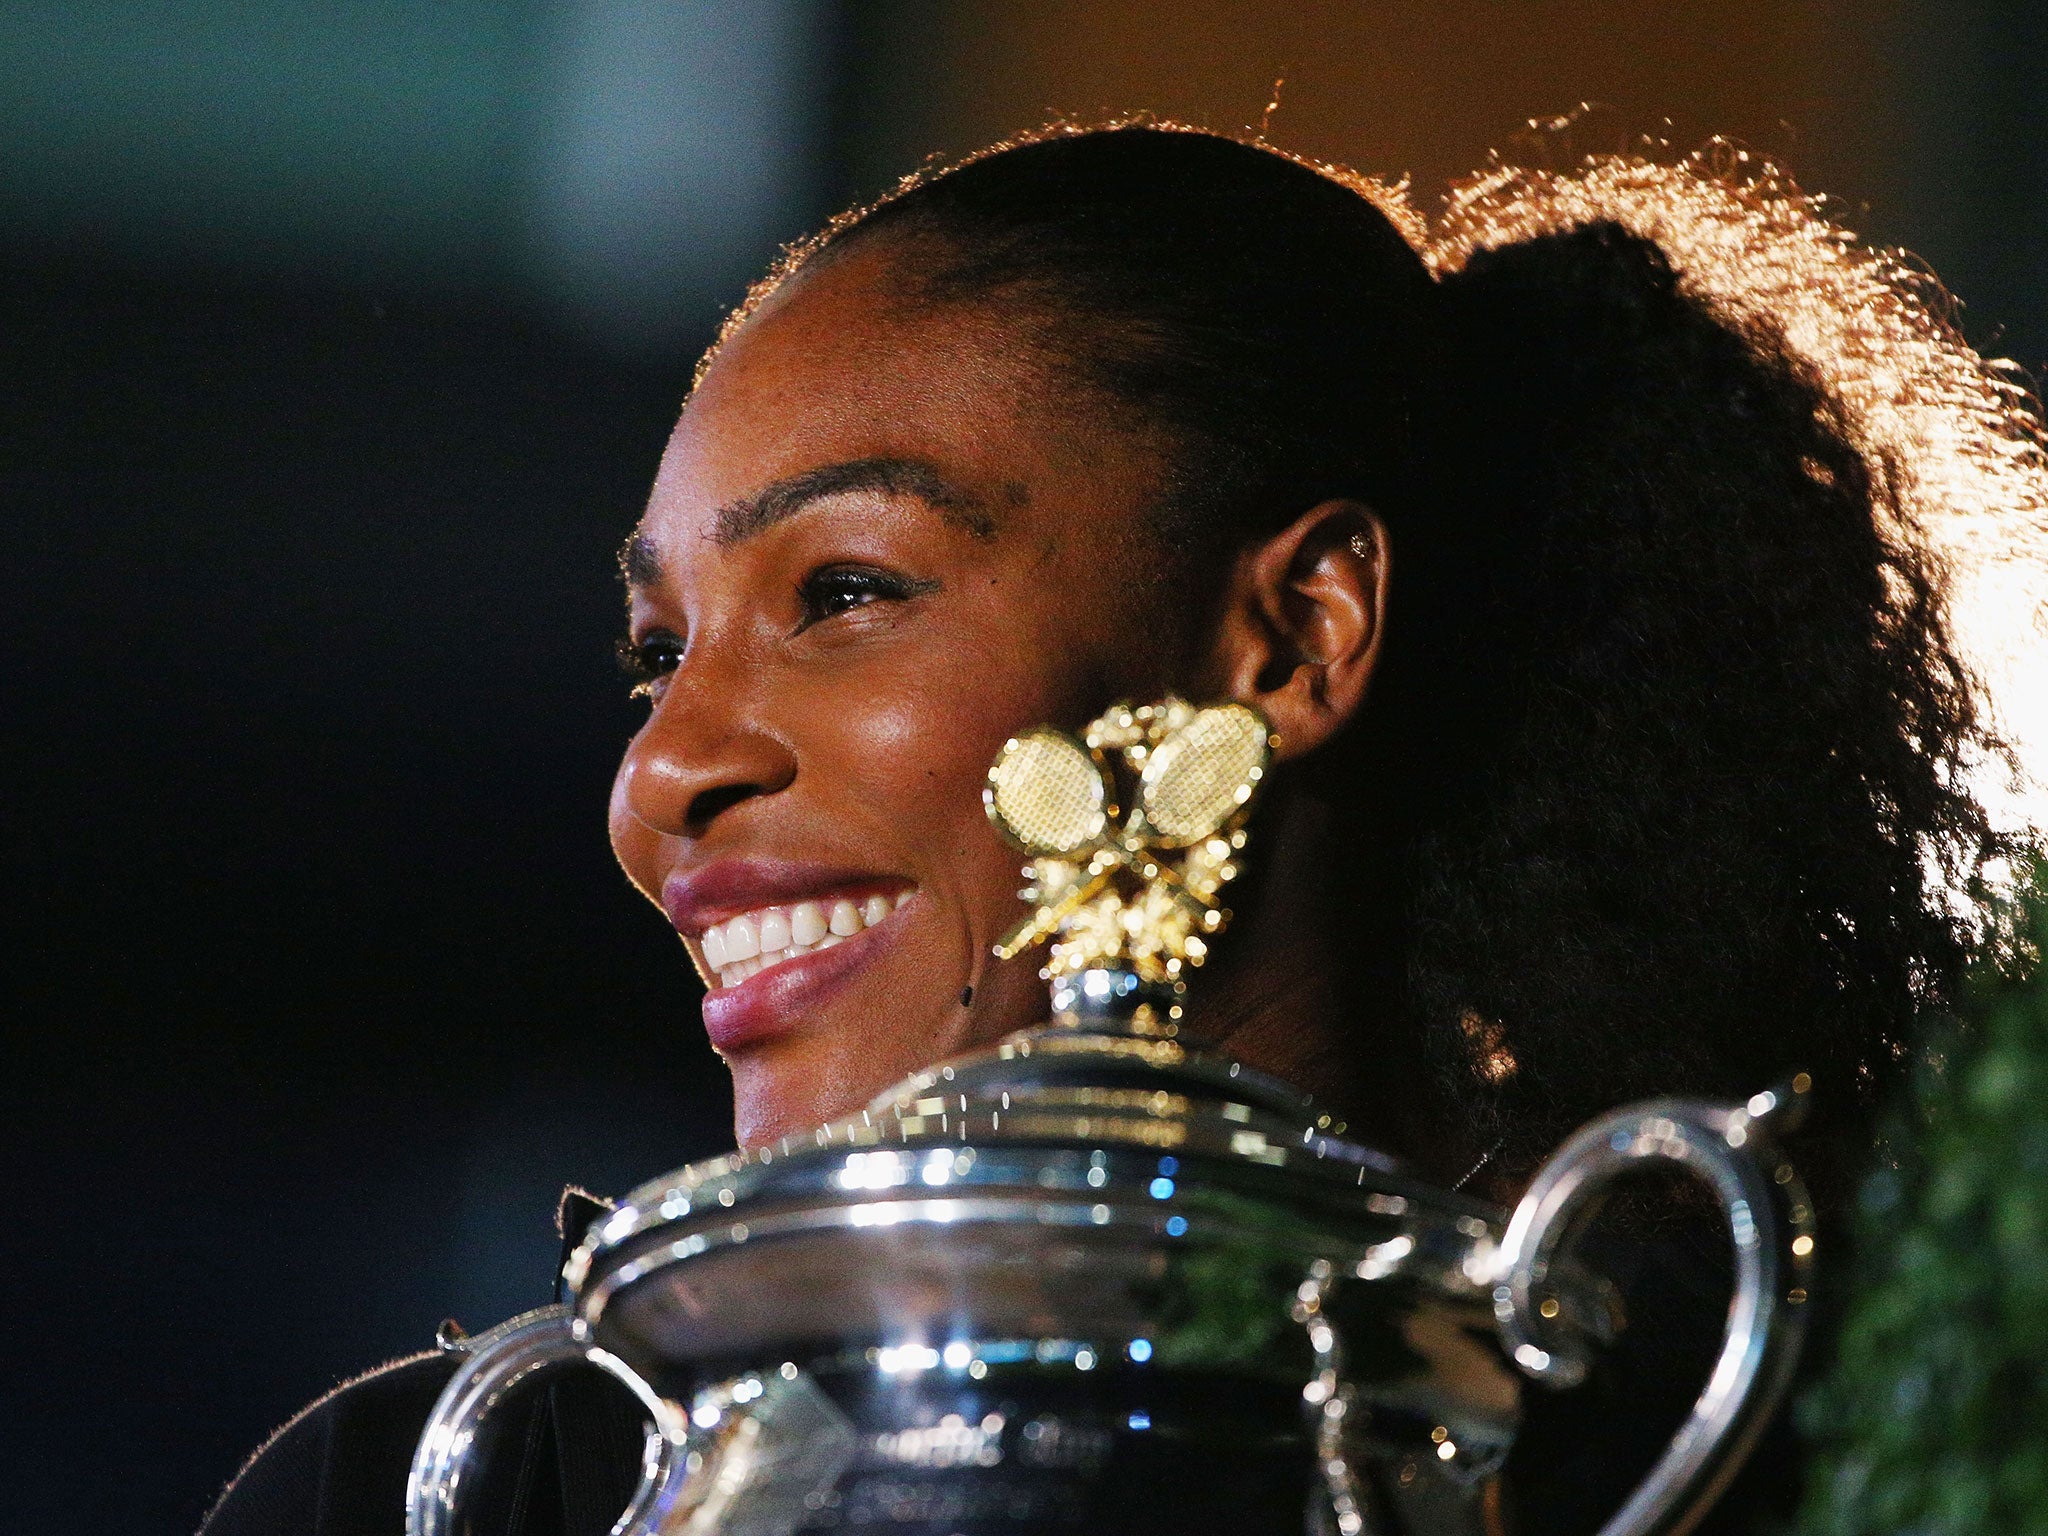 McEnroe has said Serena Williams would rank 700th in the world if she played in the men's tour